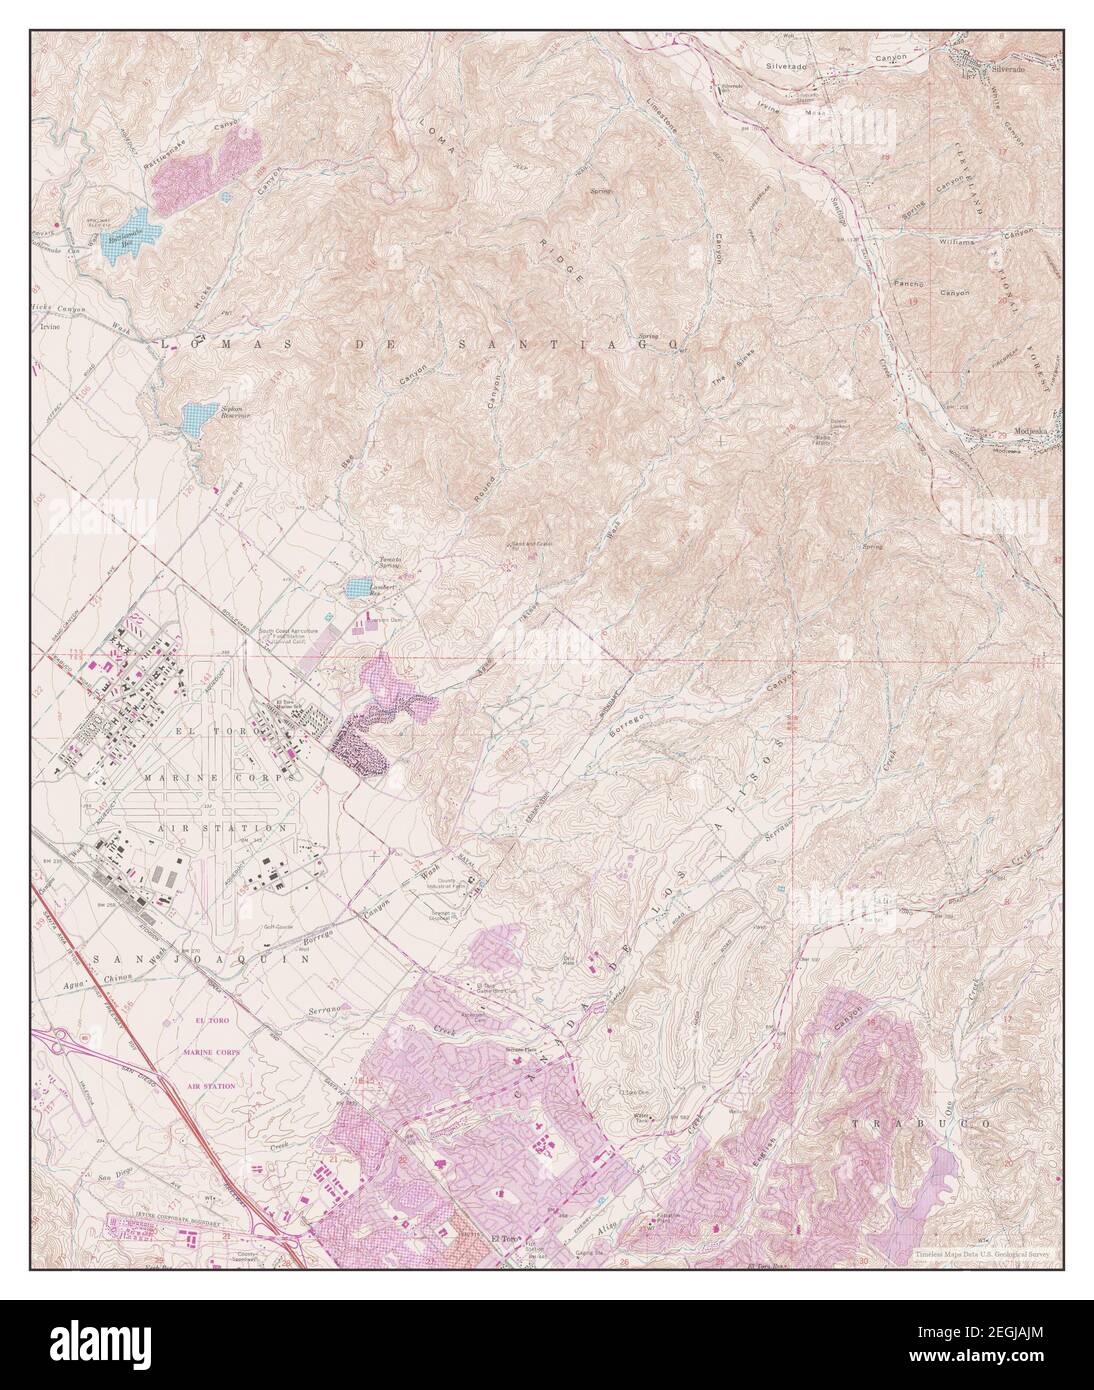 El Toro, California, map 1968, 1:24000, United States of America by Timeless Maps, data U.S. Geological Survey Stock Photo